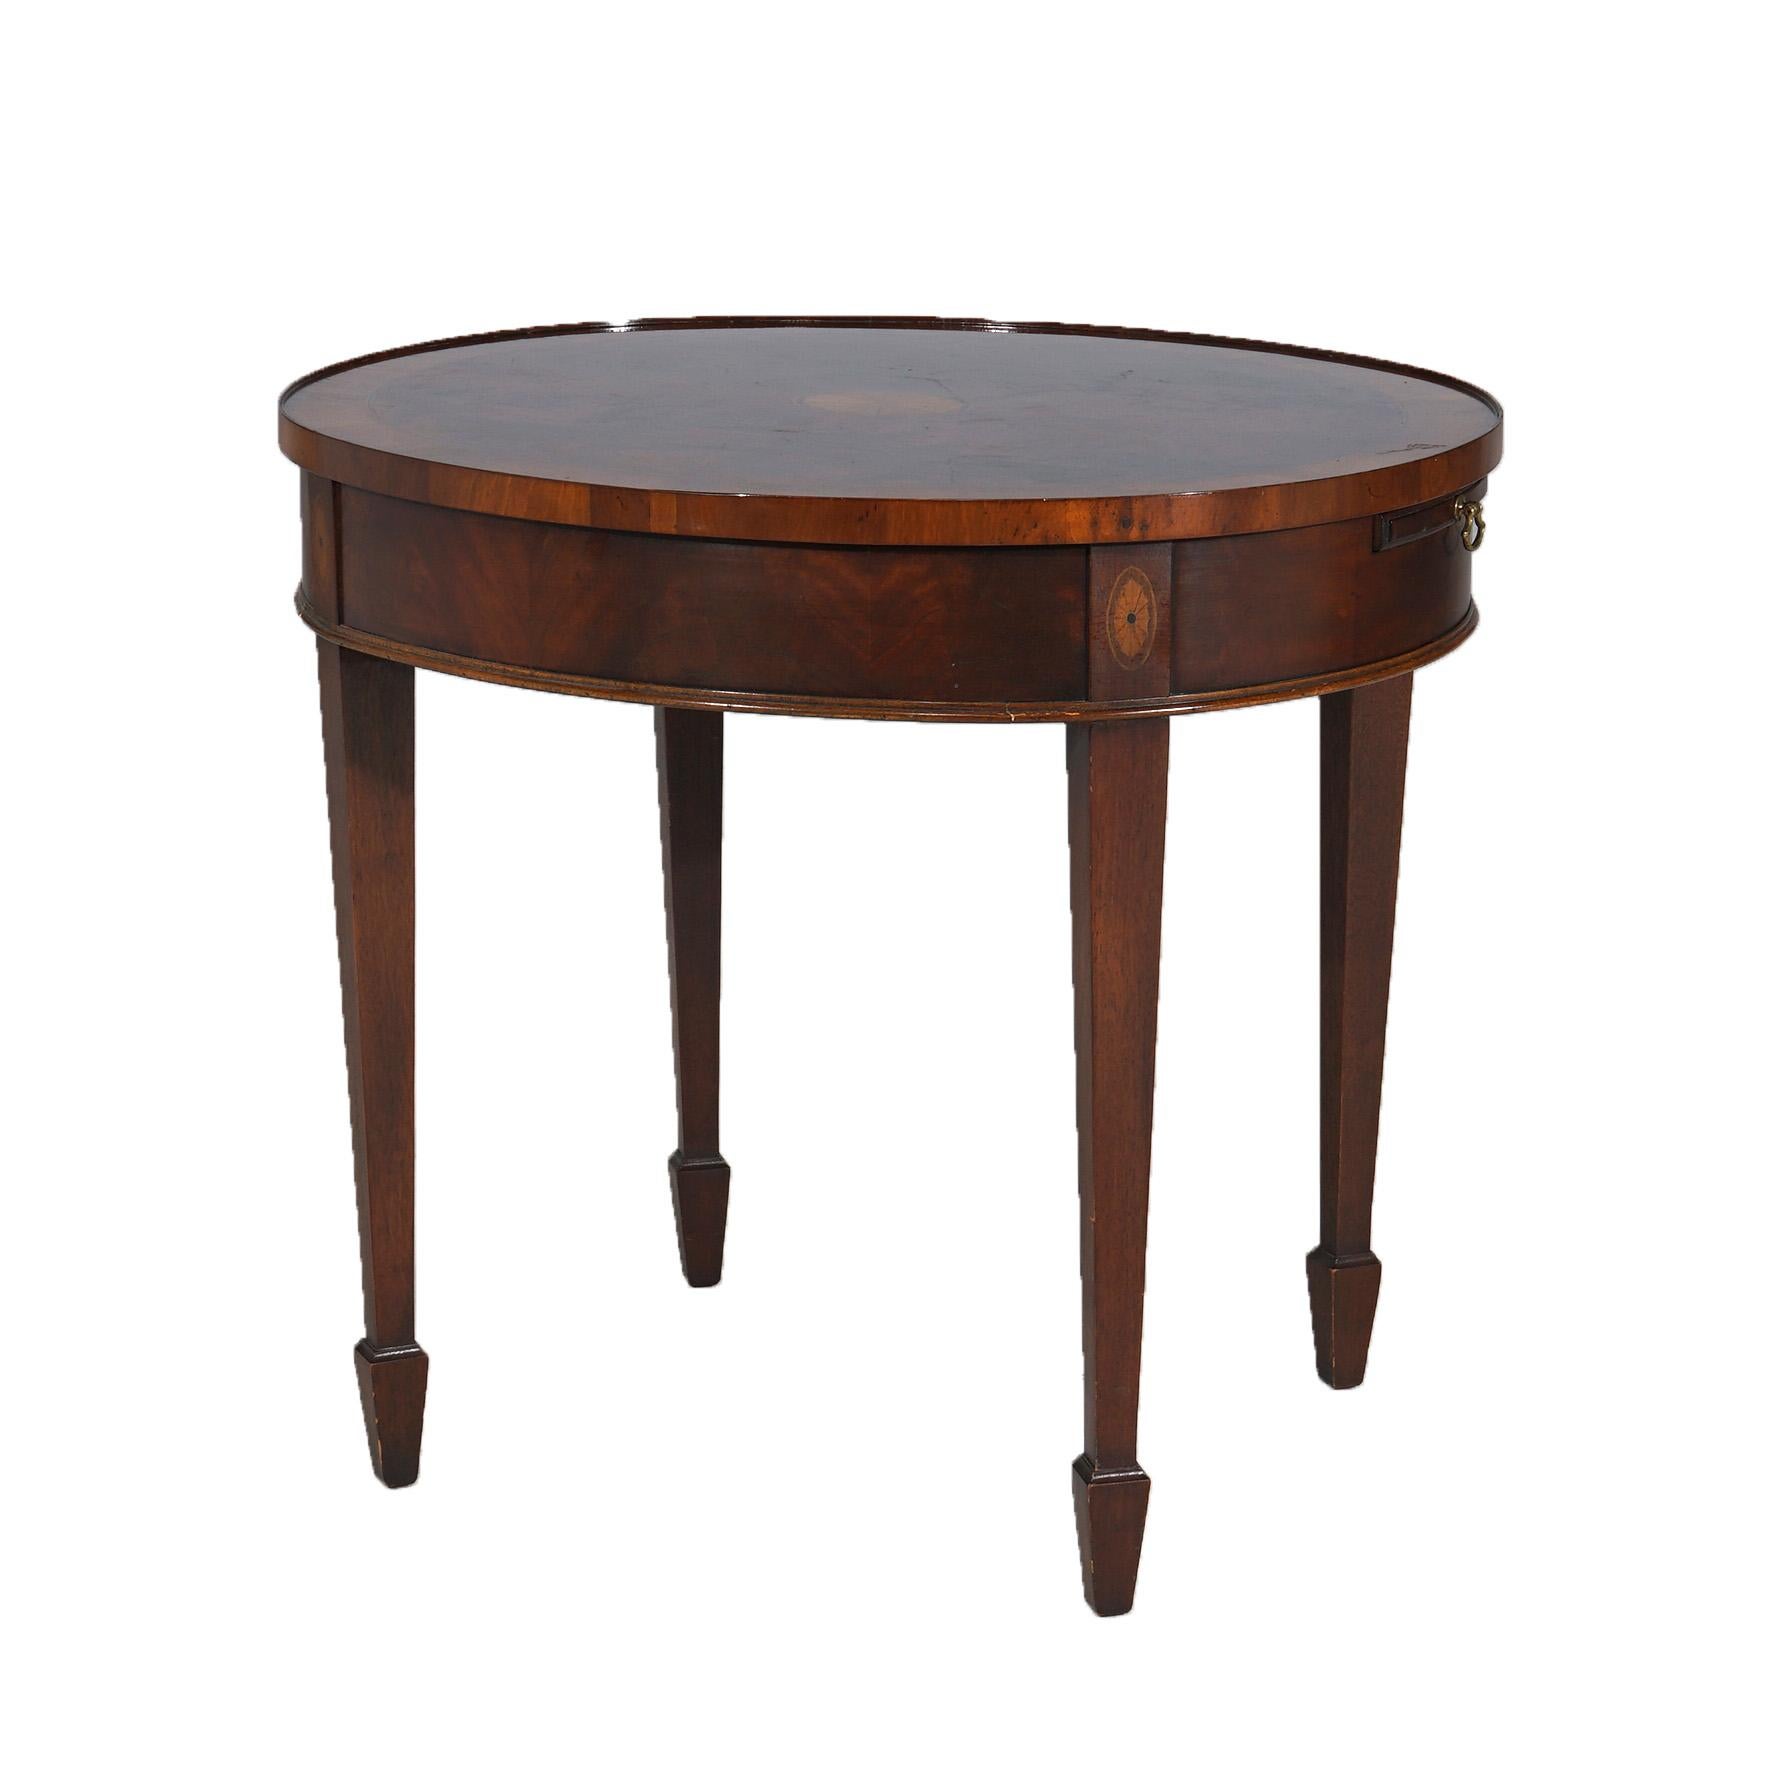 Hekman Copley Style Flame Mahogany & Satinwood Inlaid Side Table C1930 For Sale 3